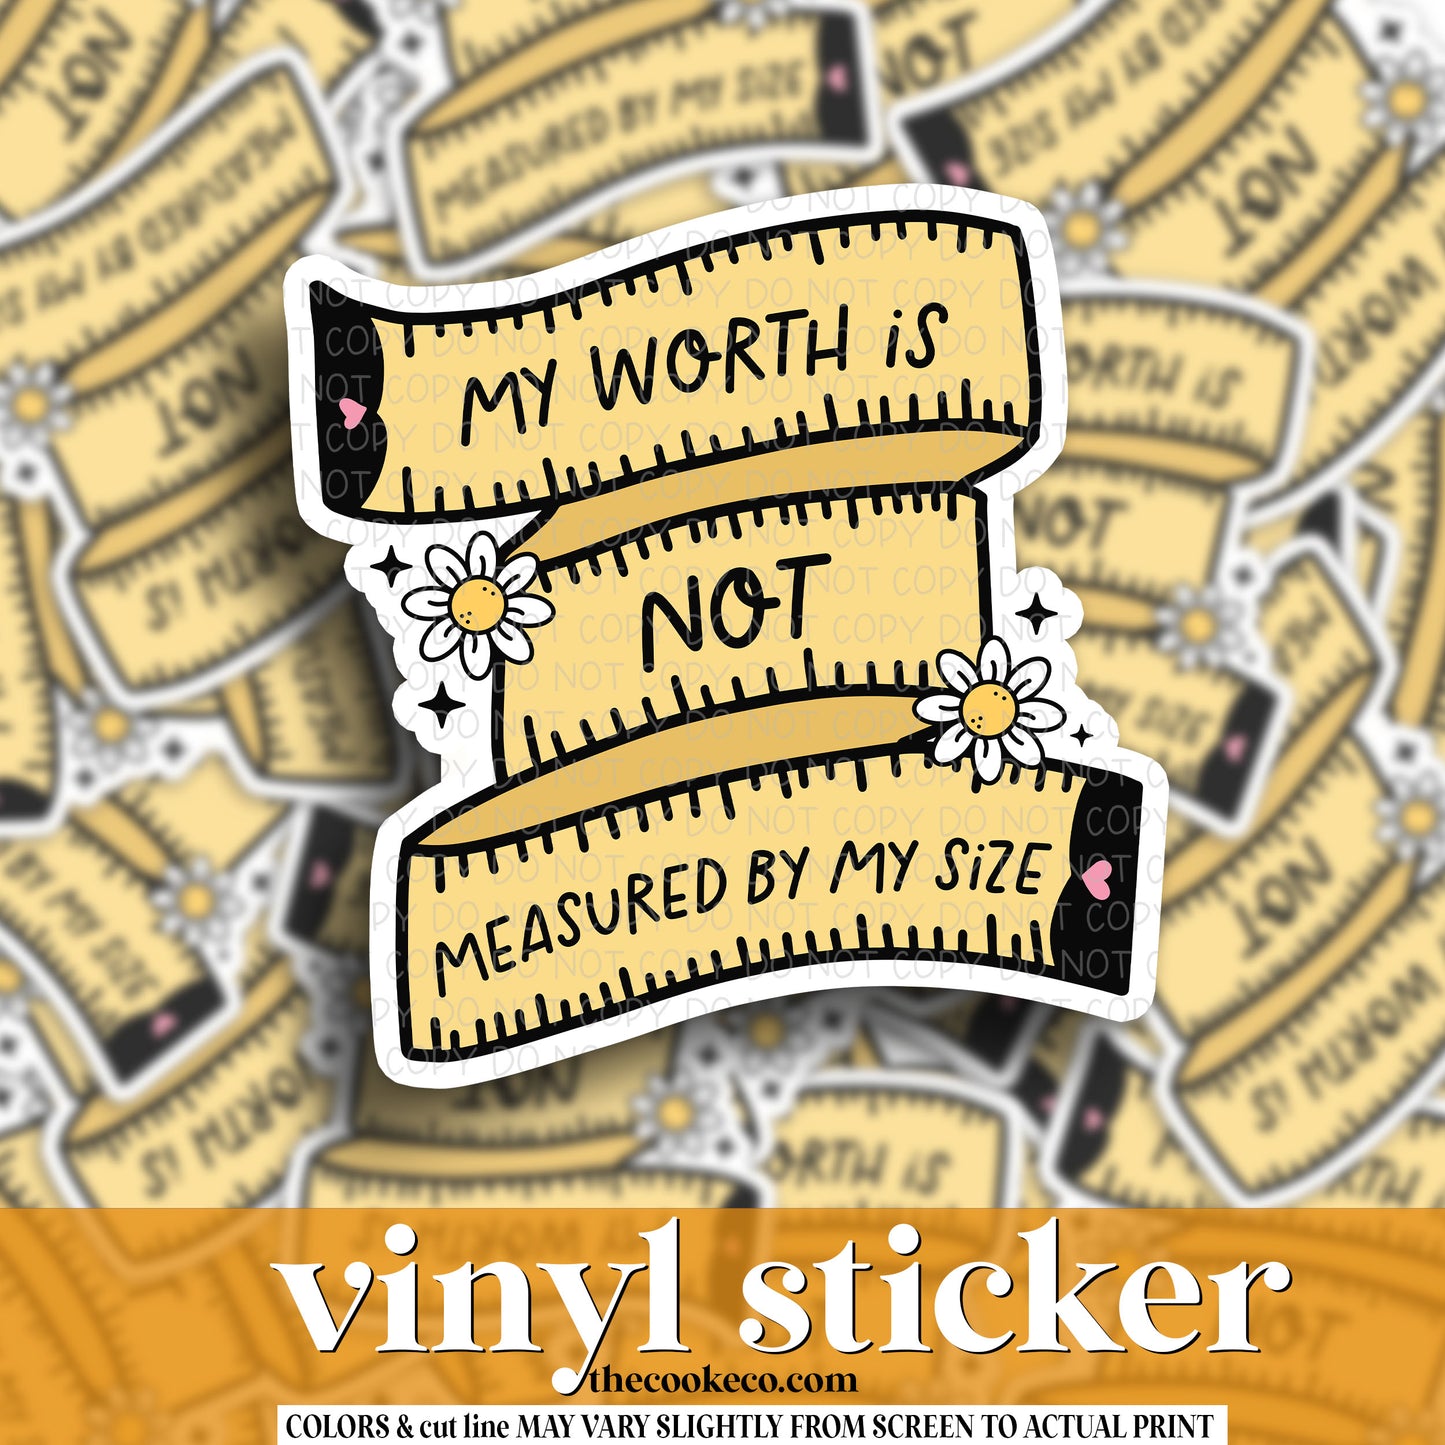 Vinyl Sticker | #V1131 - MY WORTH IS NOT MEASURED BY MY SIZE